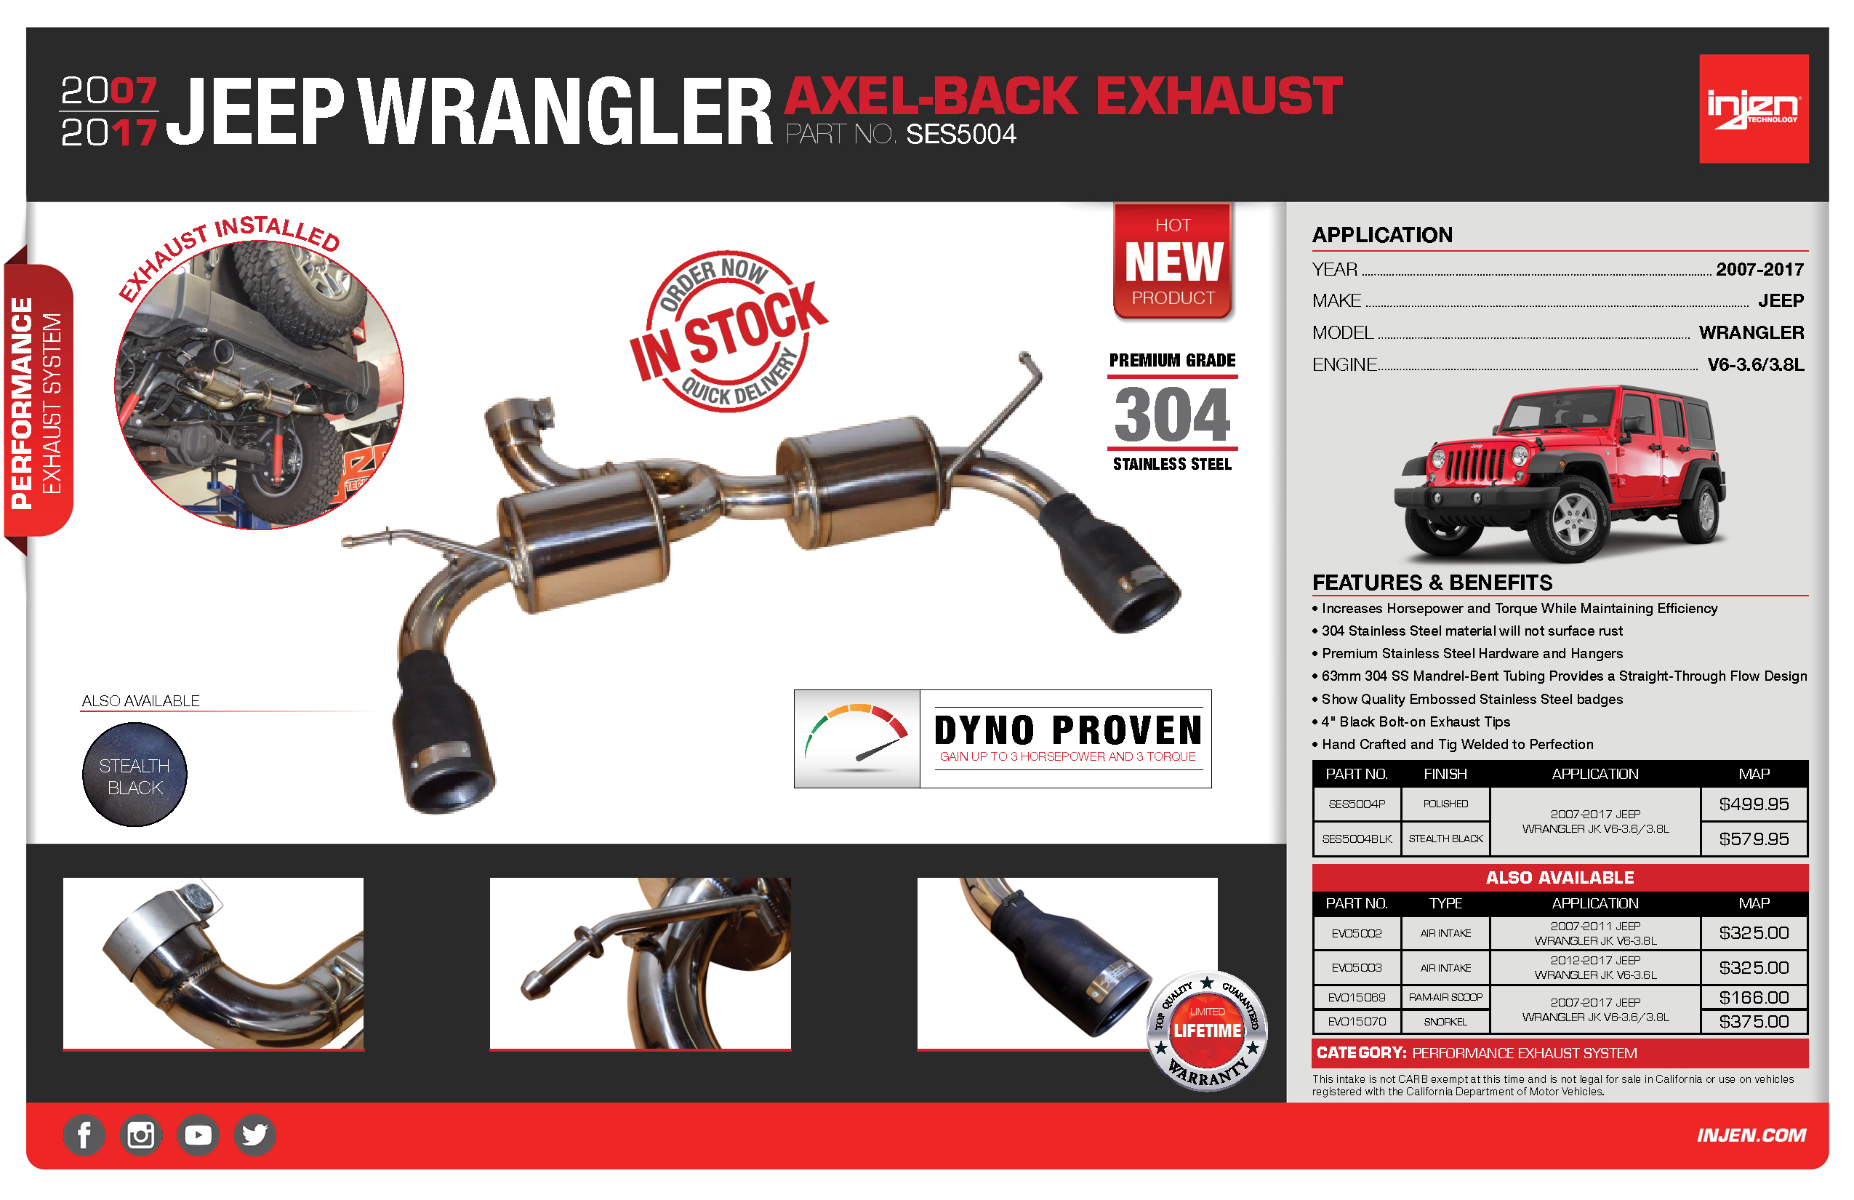 NOW SHIPPING! Injen Technology's All-new Axel-Back Exhaust for the  2007-2017 Jeep Wrangler JK – Part No. SES5004